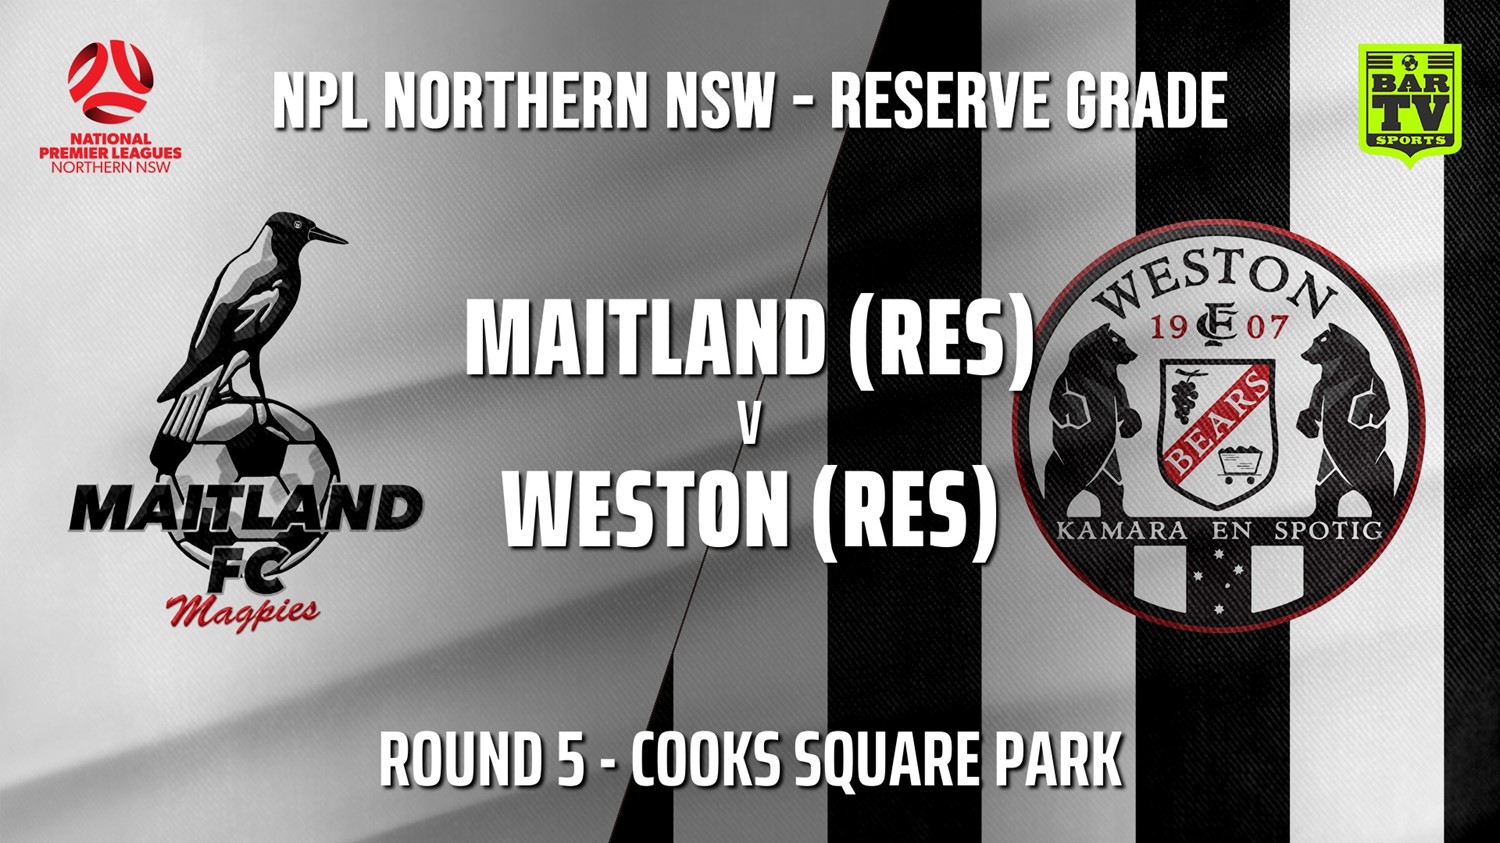 210421-NPL NNSW RES Round 5 - Maitland FC v Weston Workers FC Minigame Slate Image